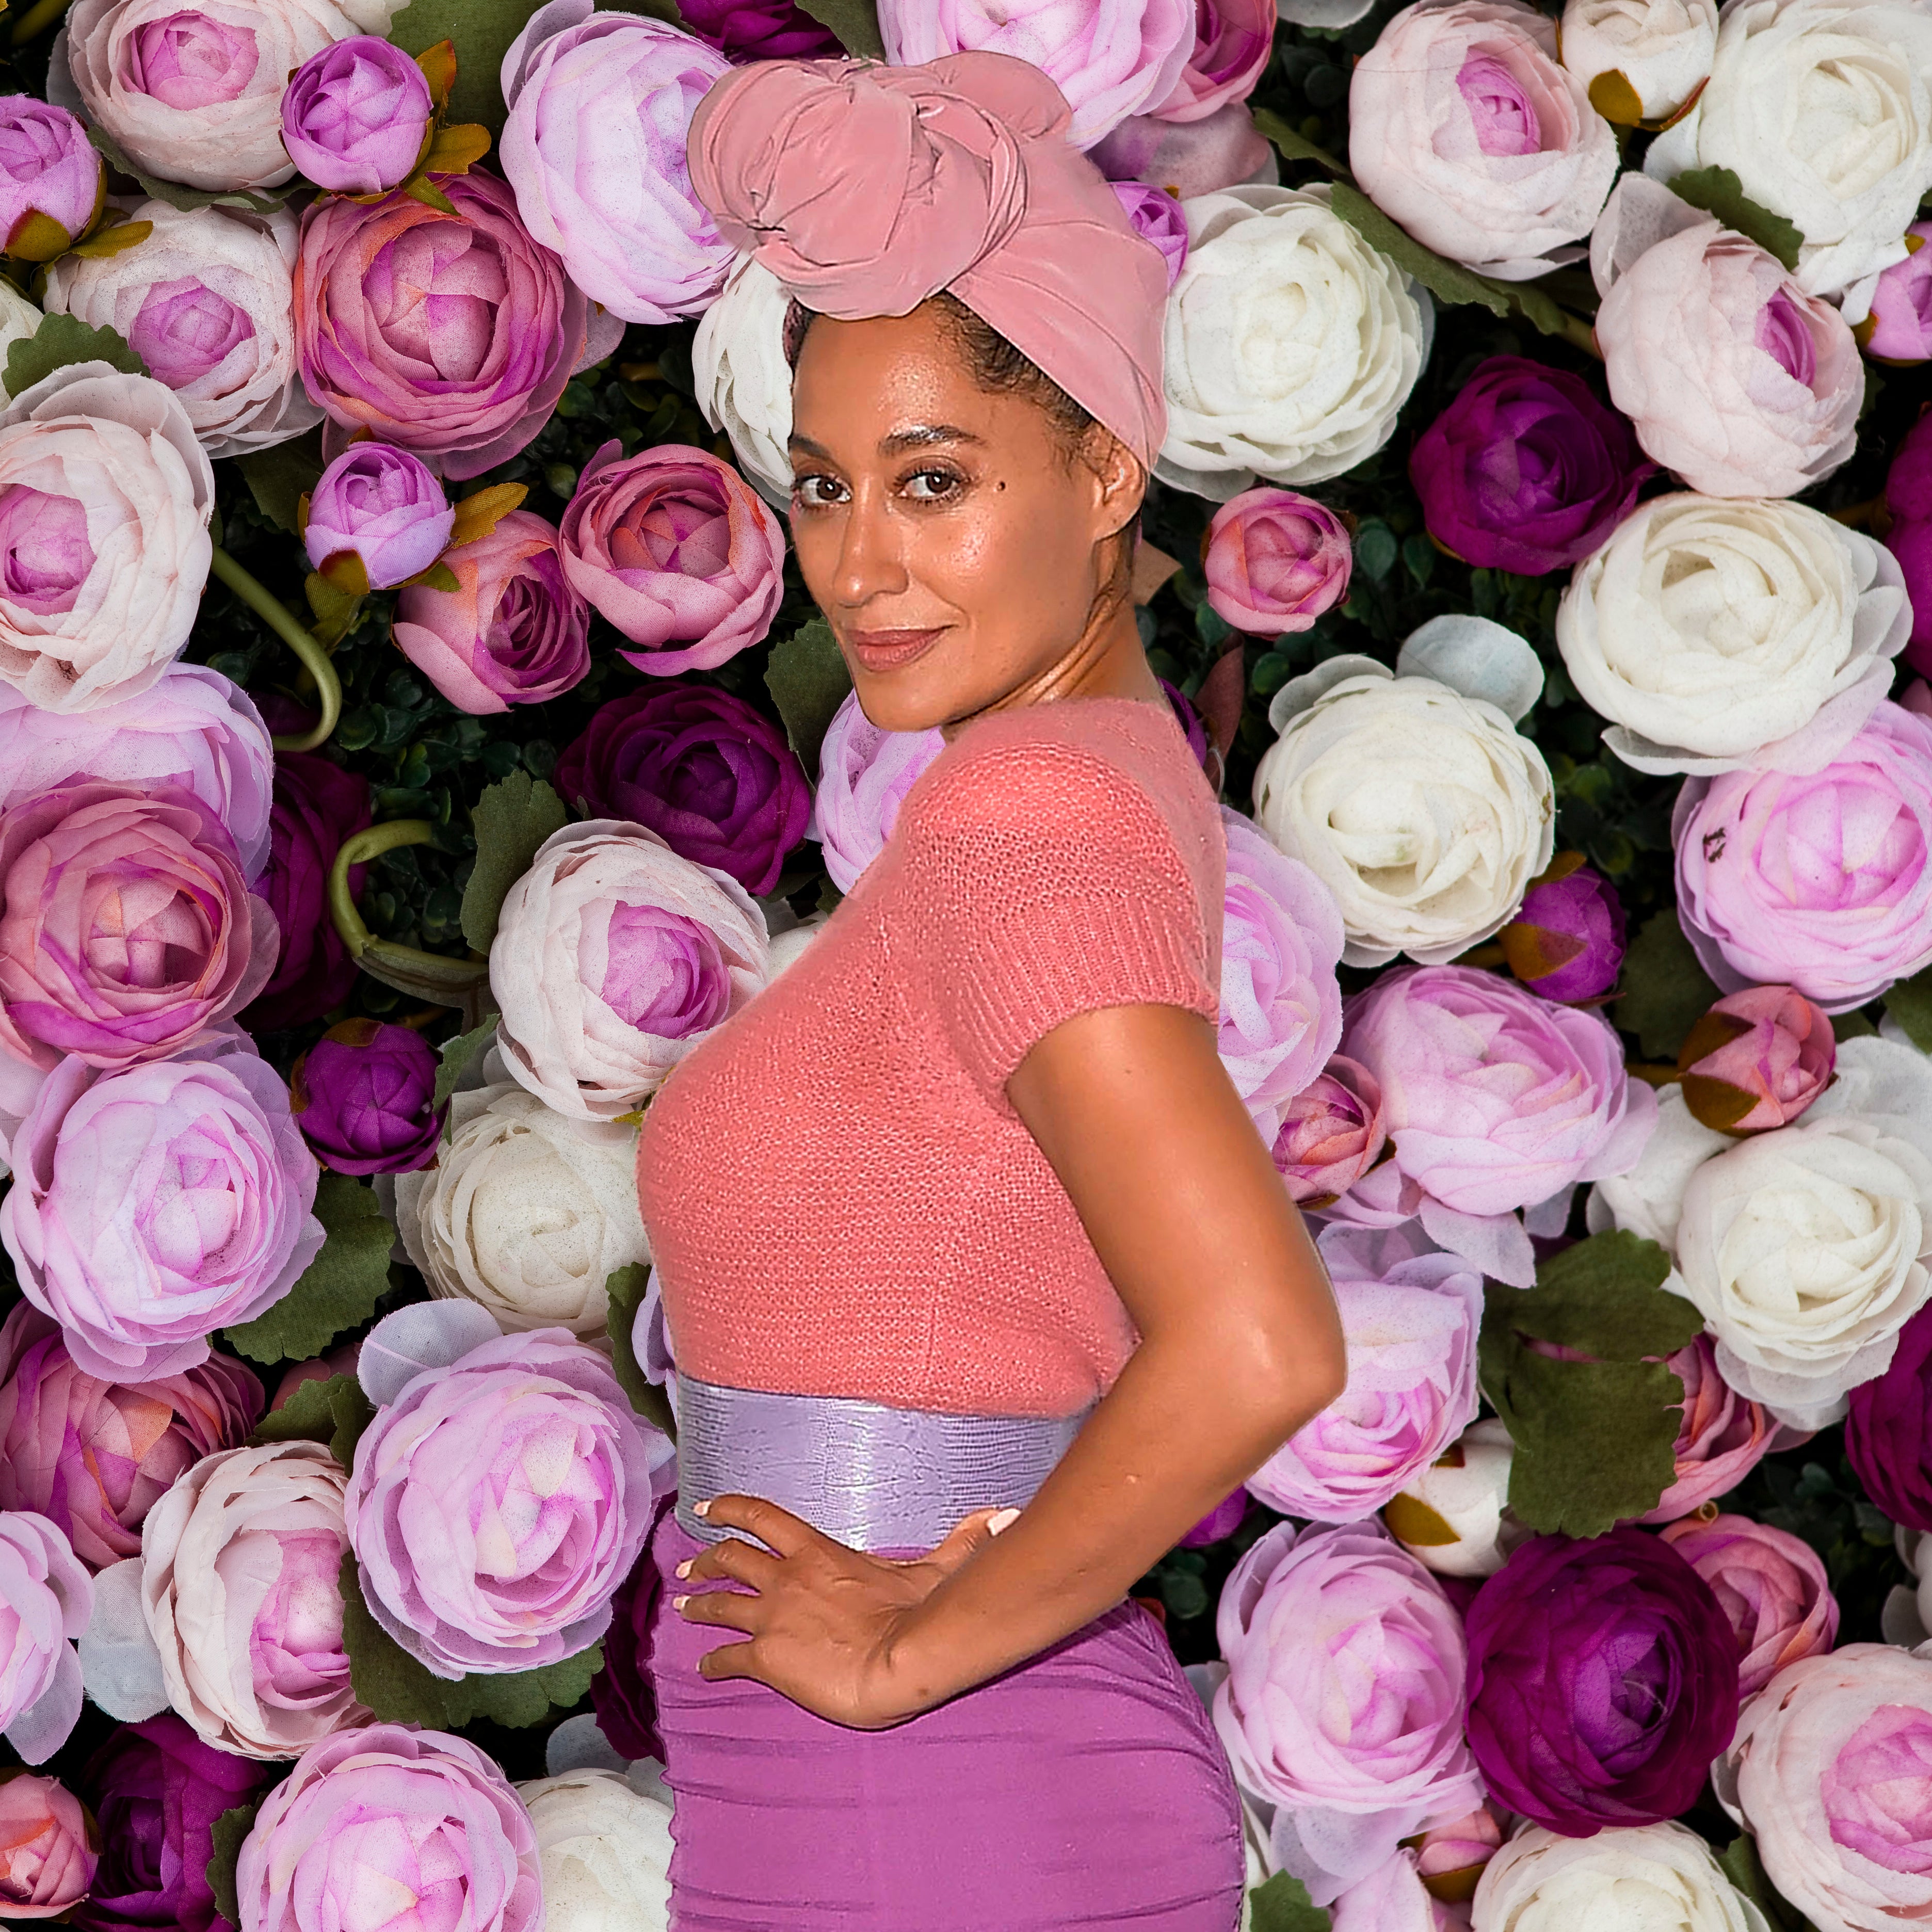 Tracee Ellis Ross Reveals Her Secret to Keeping Calm On Emmy Nomination Morning (Hint: It Involves Birds!)